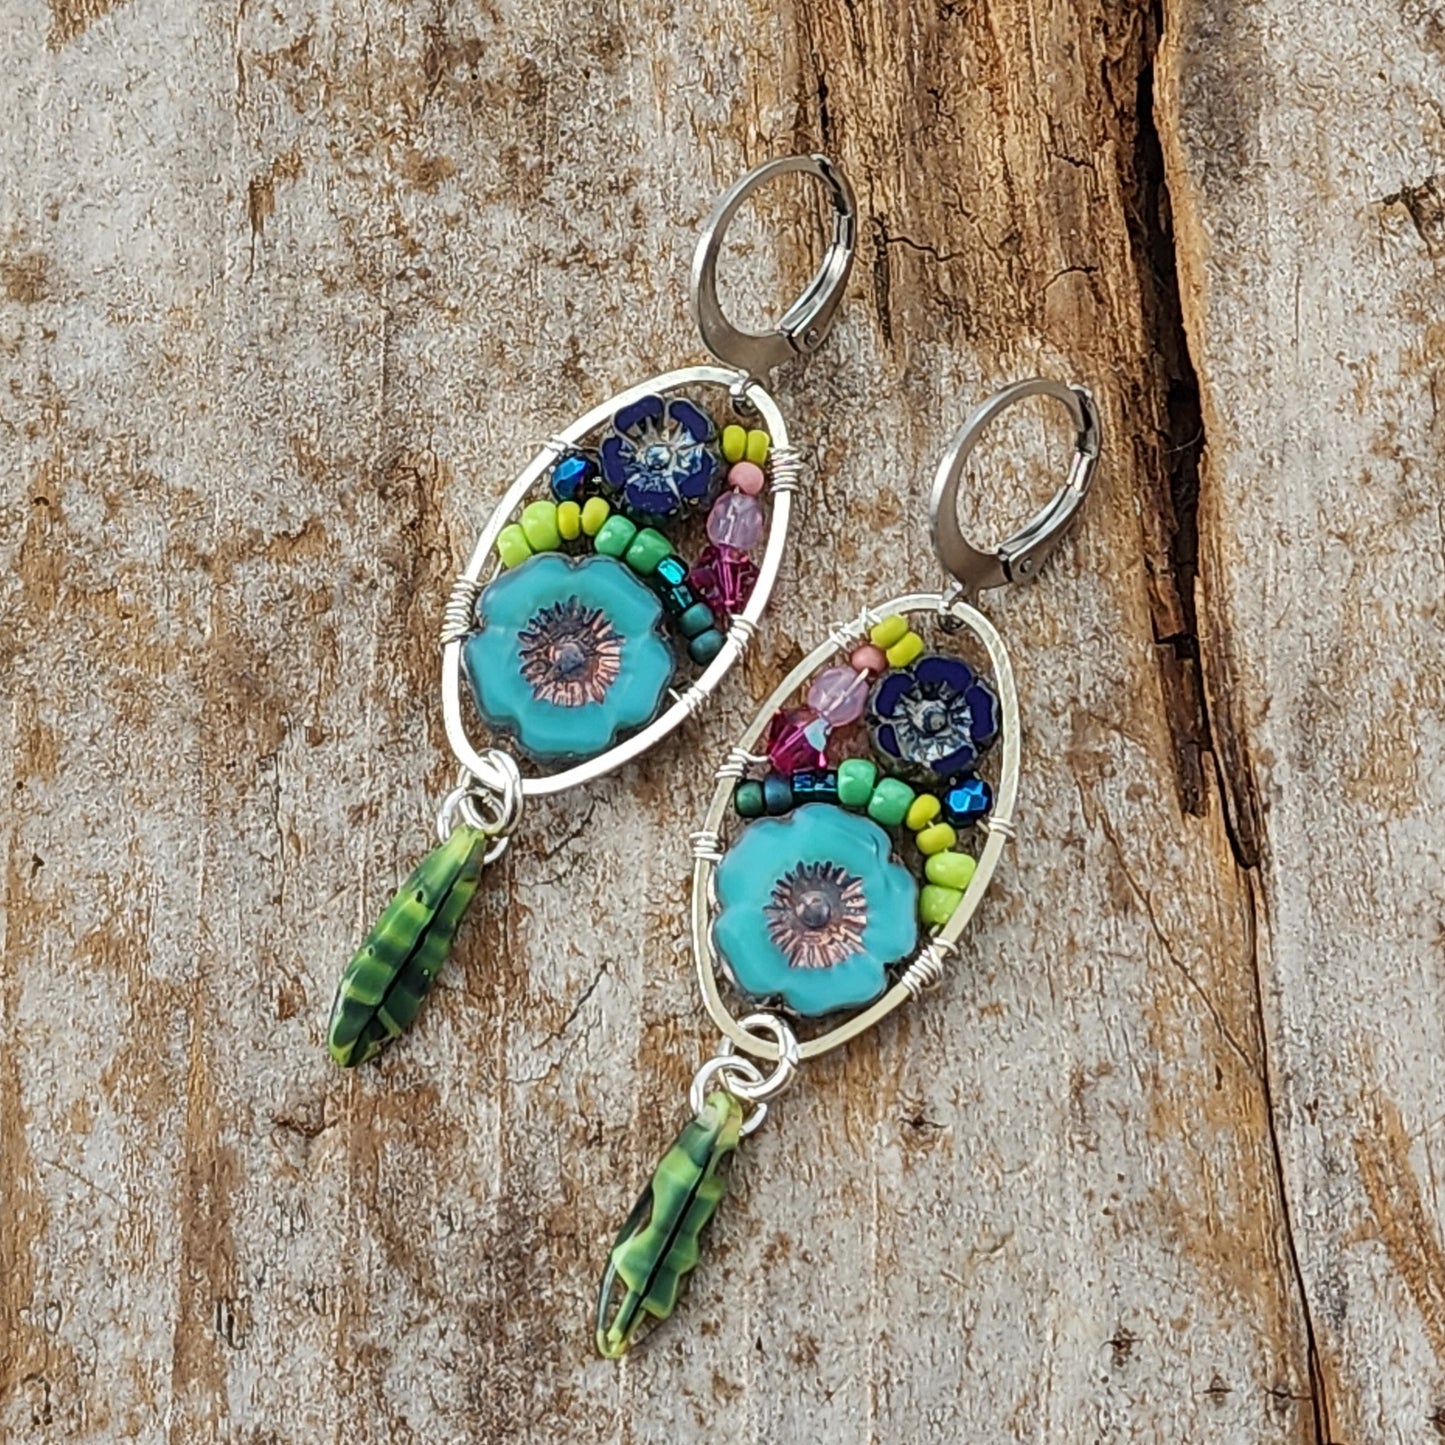 Dangle Earrings - Czech glass flowers, Swarovski, Japanese seed beads woven onto silver oval hoop. Stainless steel euro wires. Length about 2.25"